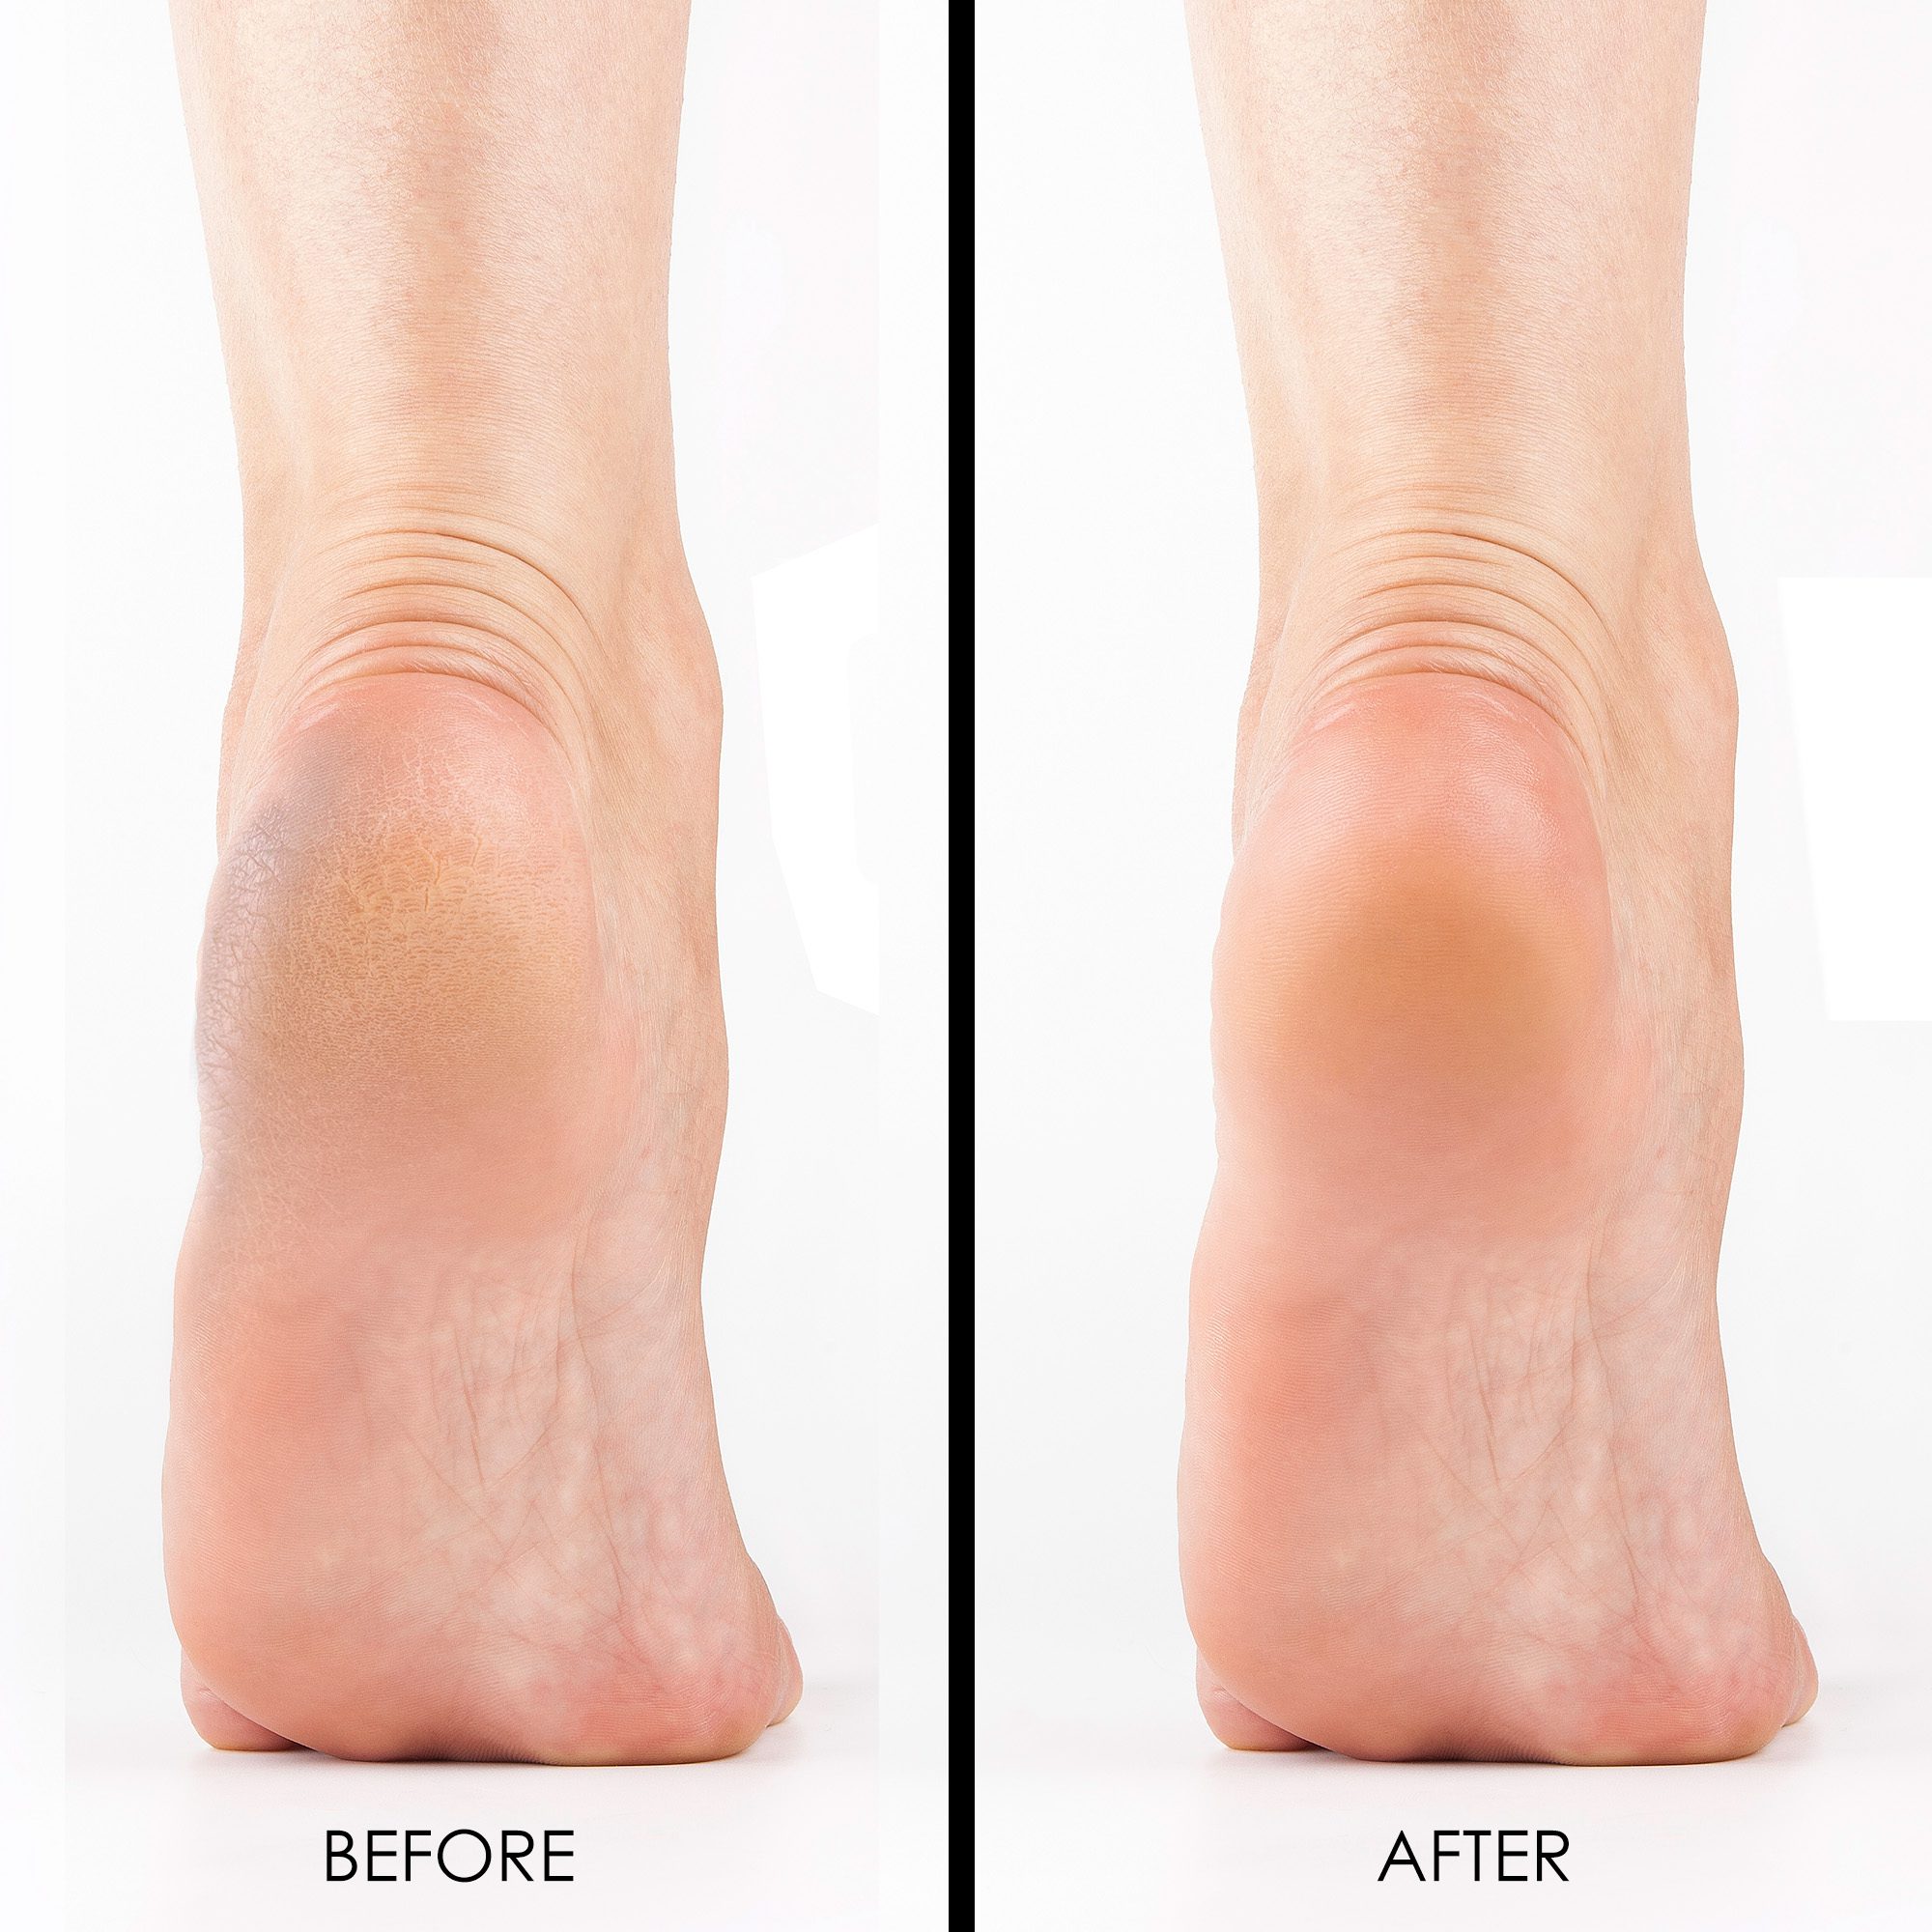 Dr Foot Callus Remover Gel Helps to remove Calluses and Corns 100ml